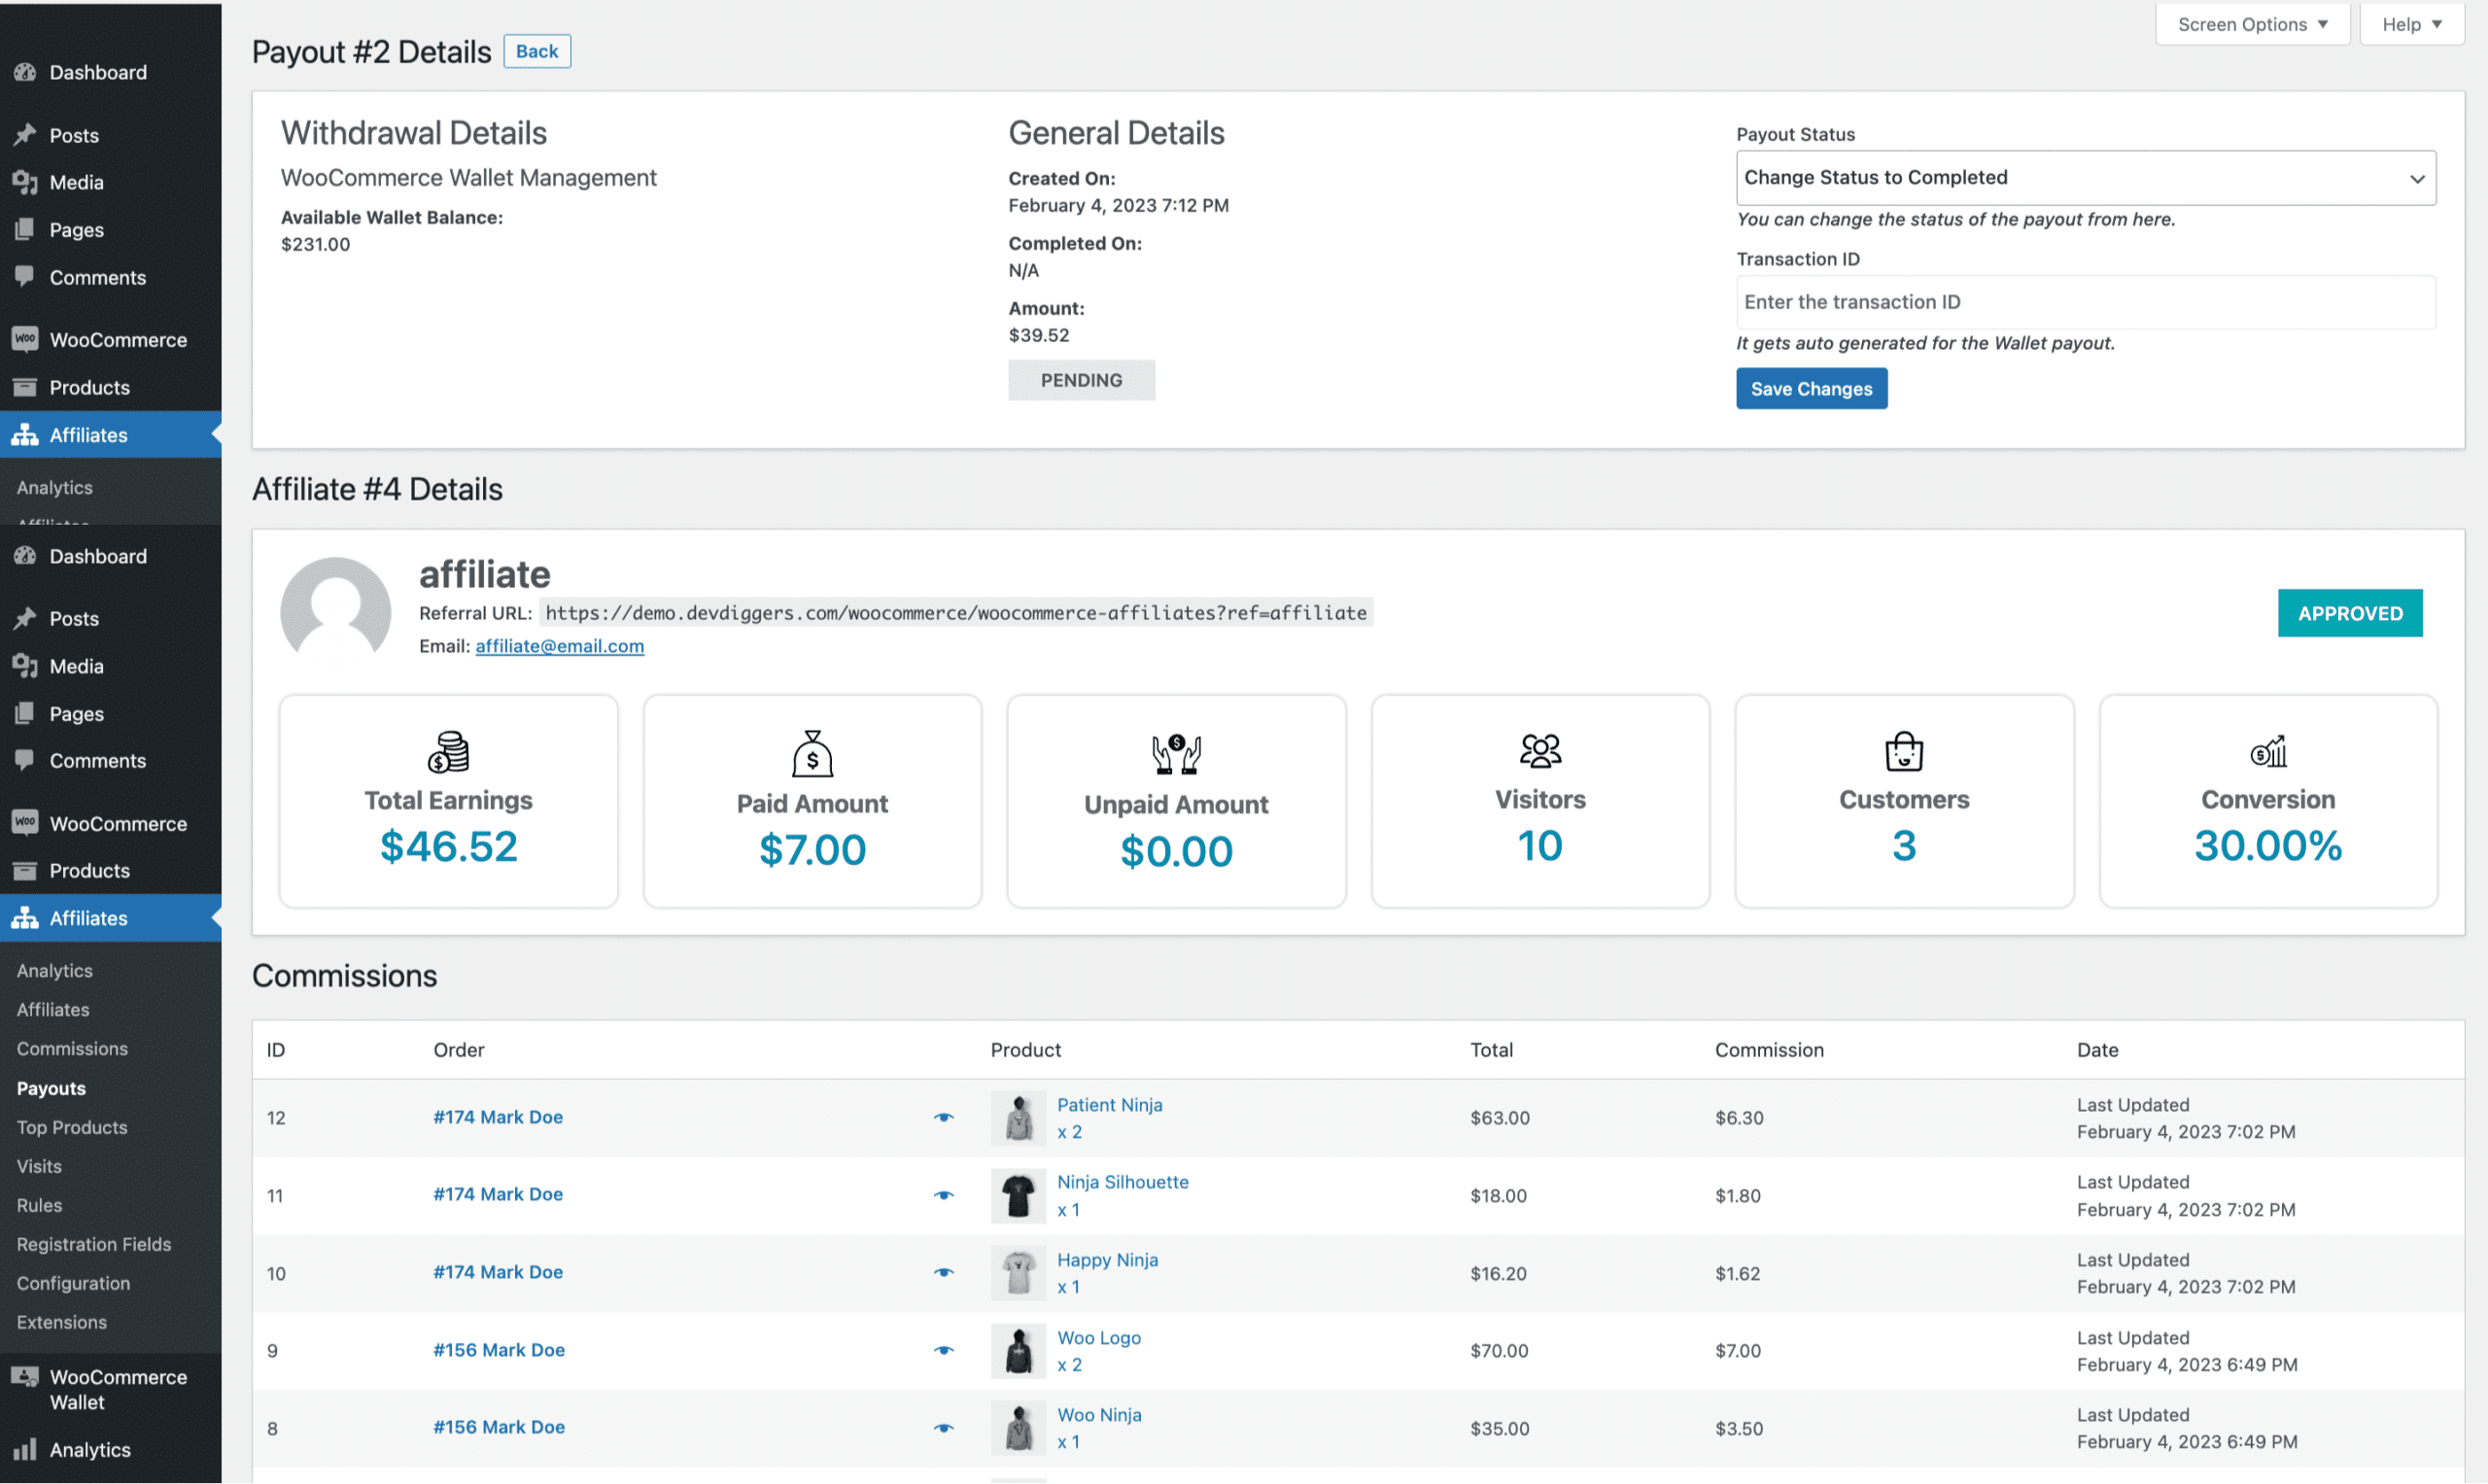 Affiliates for WooCommerce Payout Details Page